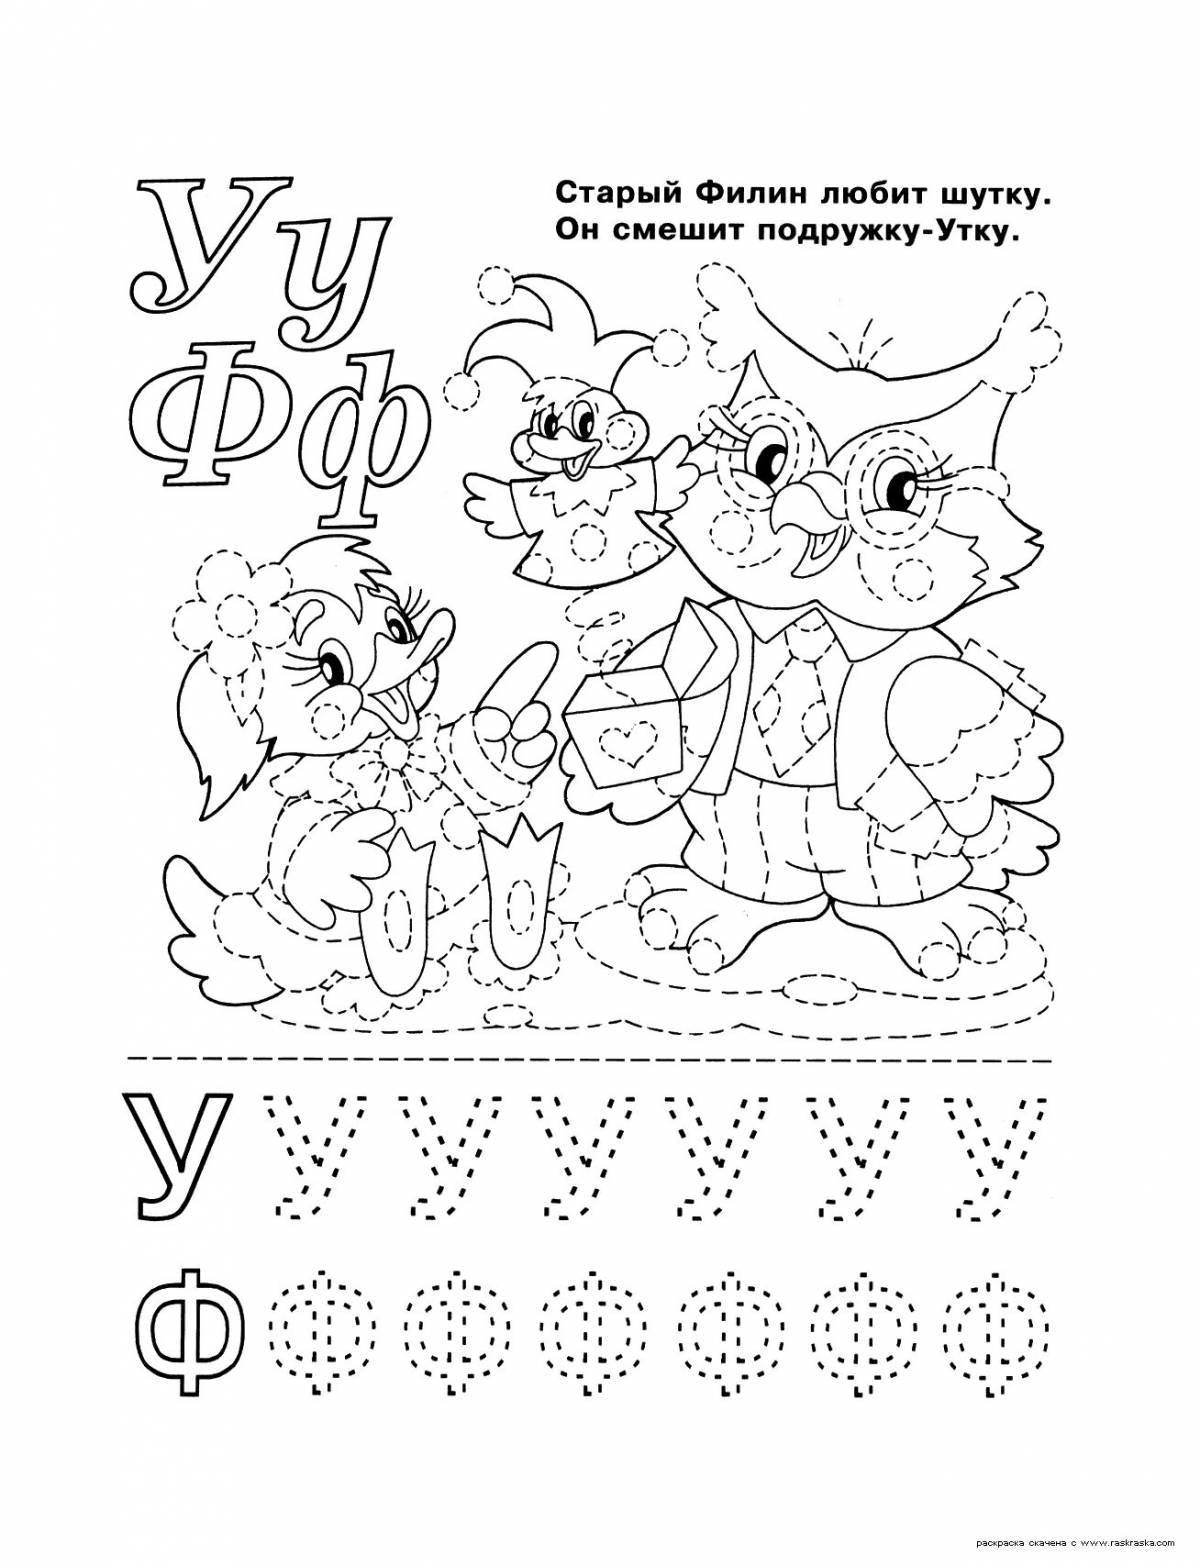 A fun coloring book with letters of the alphabet for children 5 years old